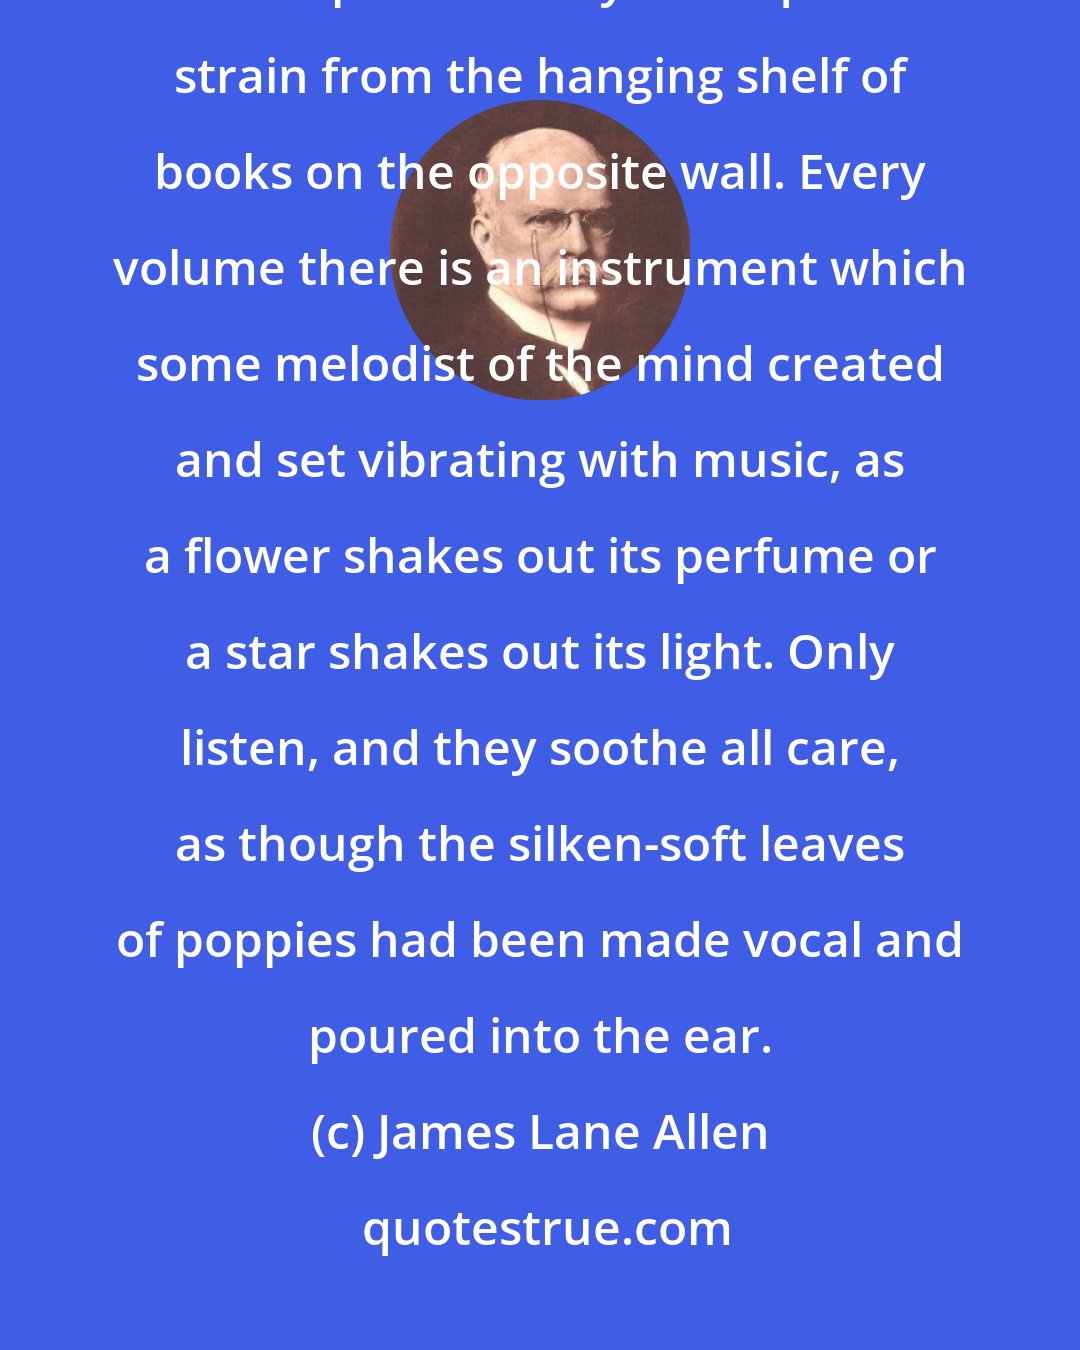 James Lane Allen: But the finest music in the room is that which streams out to the ear of the spirit in many an exquisite strain from the hanging shelf of books on the opposite wall. Every volume there is an instrument which some melodist of the mind created and set vibrating with music, as a flower shakes out its perfume or a star shakes out its light. Only listen, and they soothe all care, as though the silken-soft leaves of poppies had been made vocal and poured into the ear.